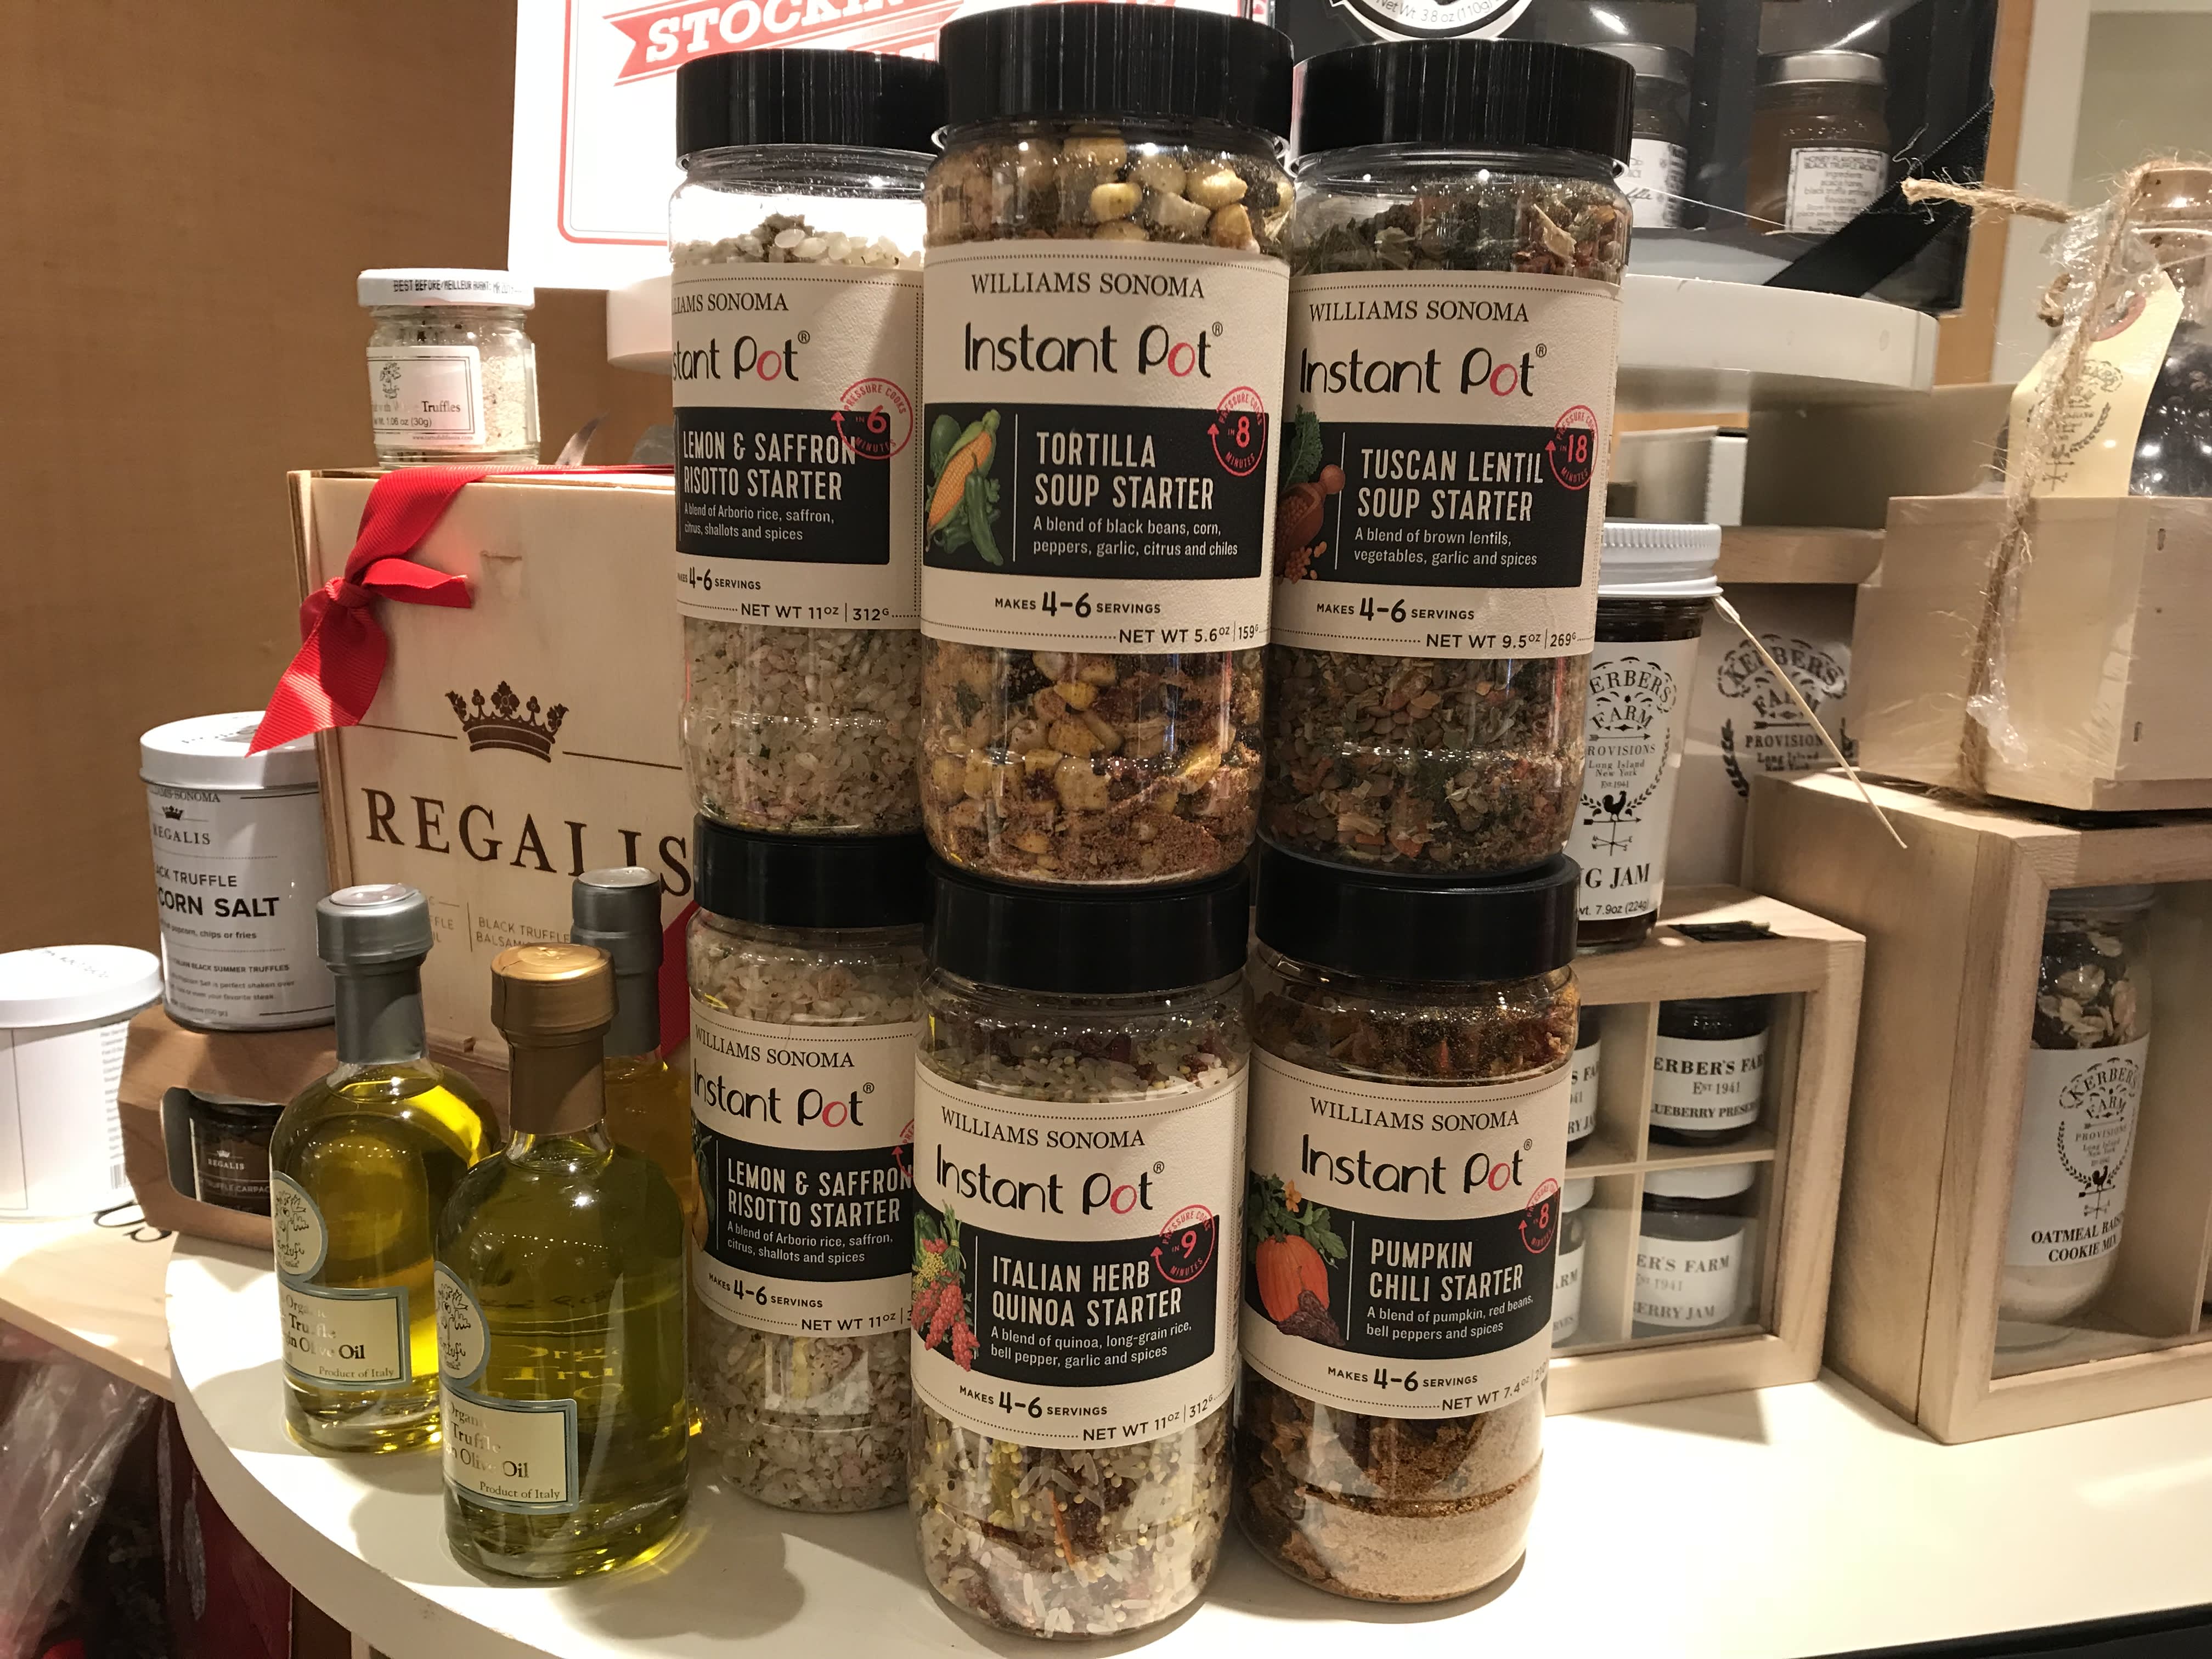 Williams Sonoma New Instant Pot Ingredients And Spices Kitchn